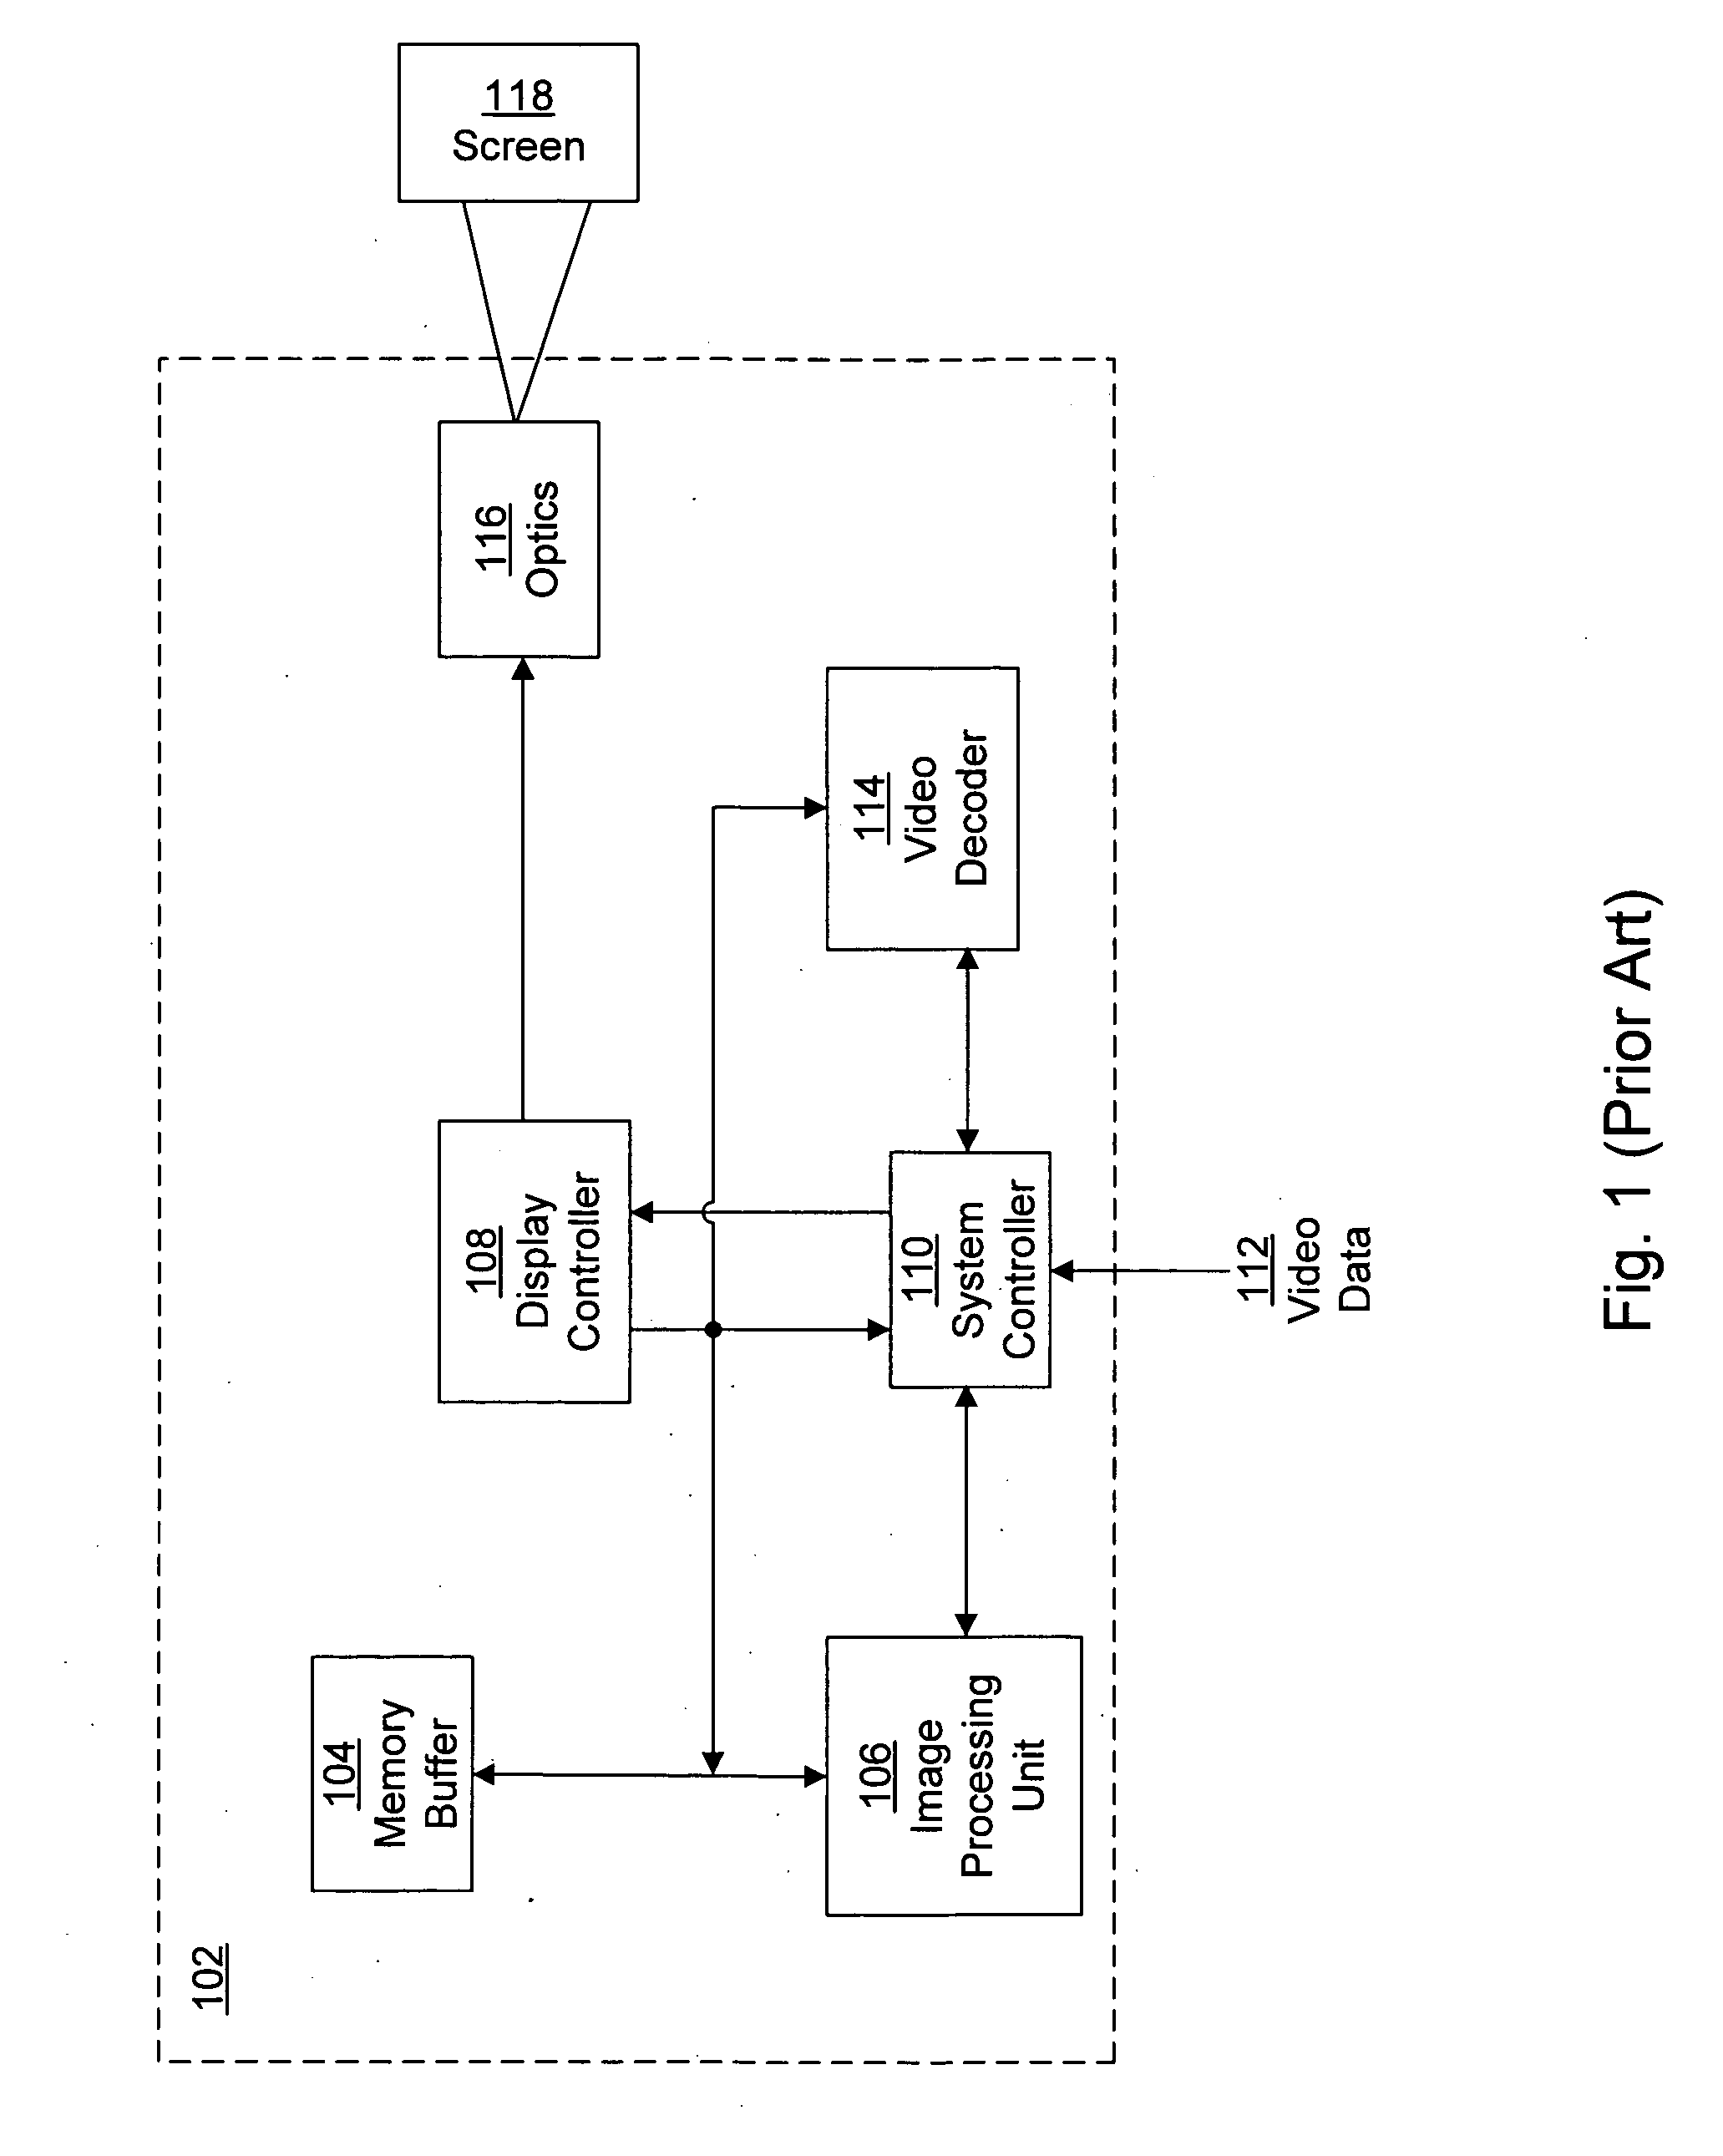 Projector/printer for displaying or printing of documents